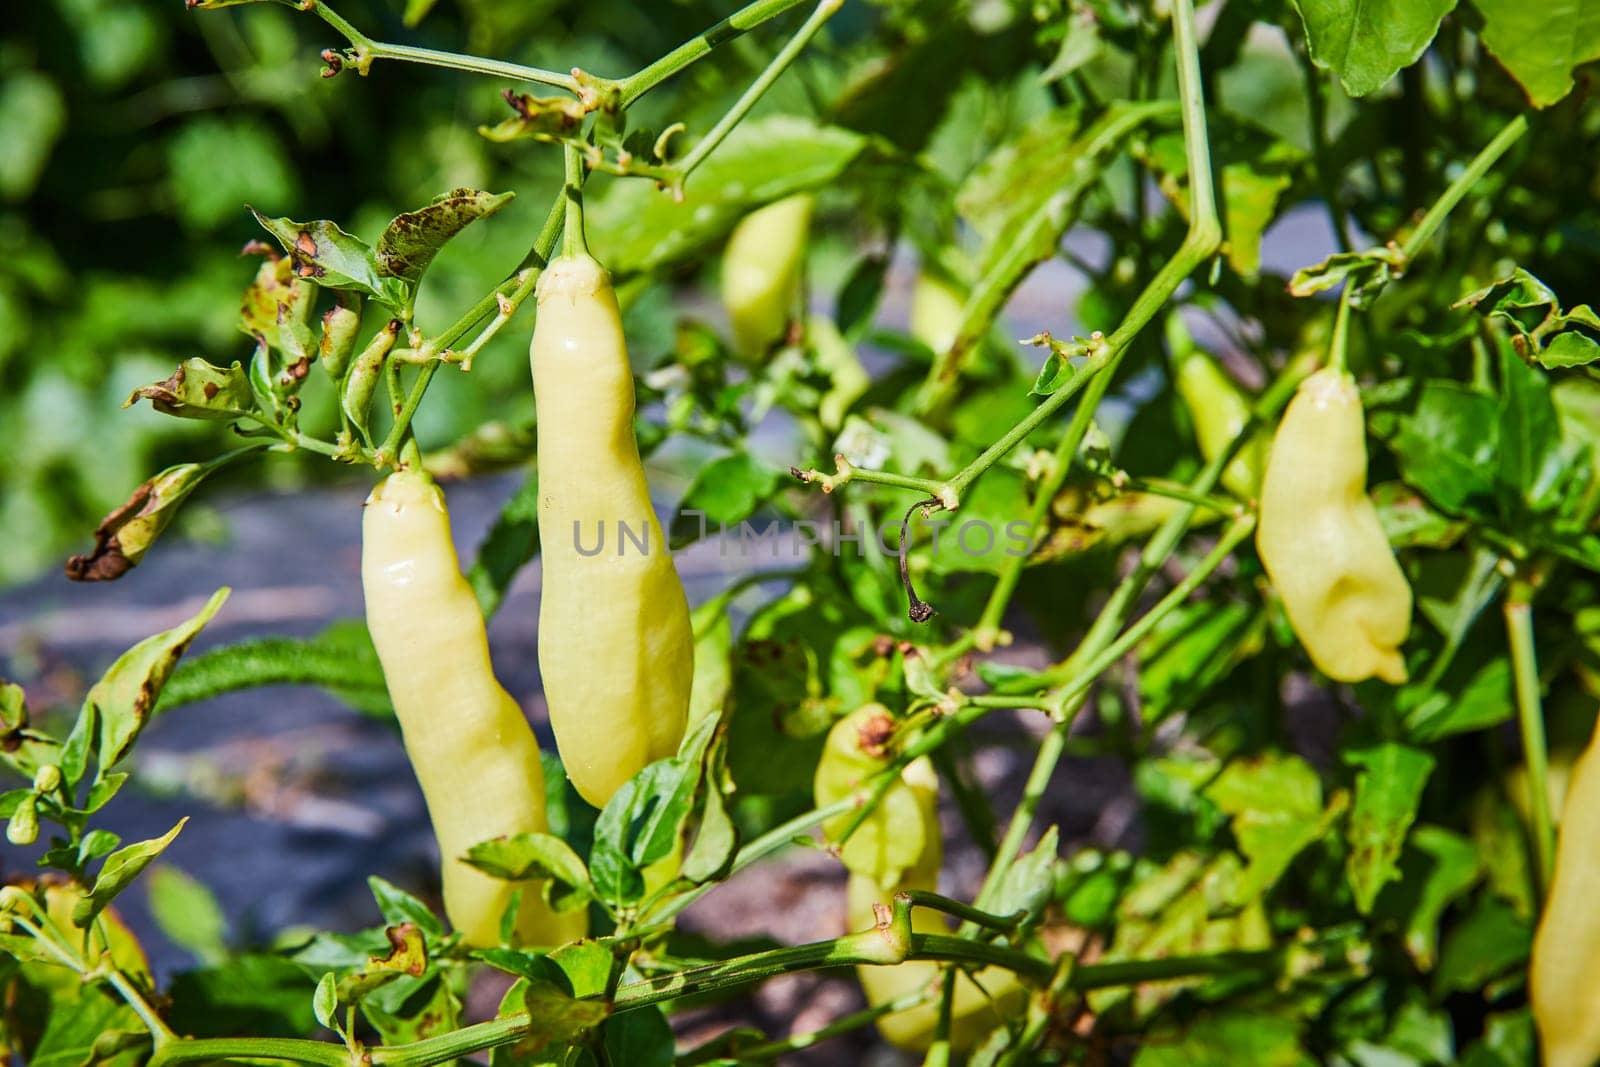 Organic Yellow Chili Peppers in Natural Light, Botanic Garden Farming by njproductions